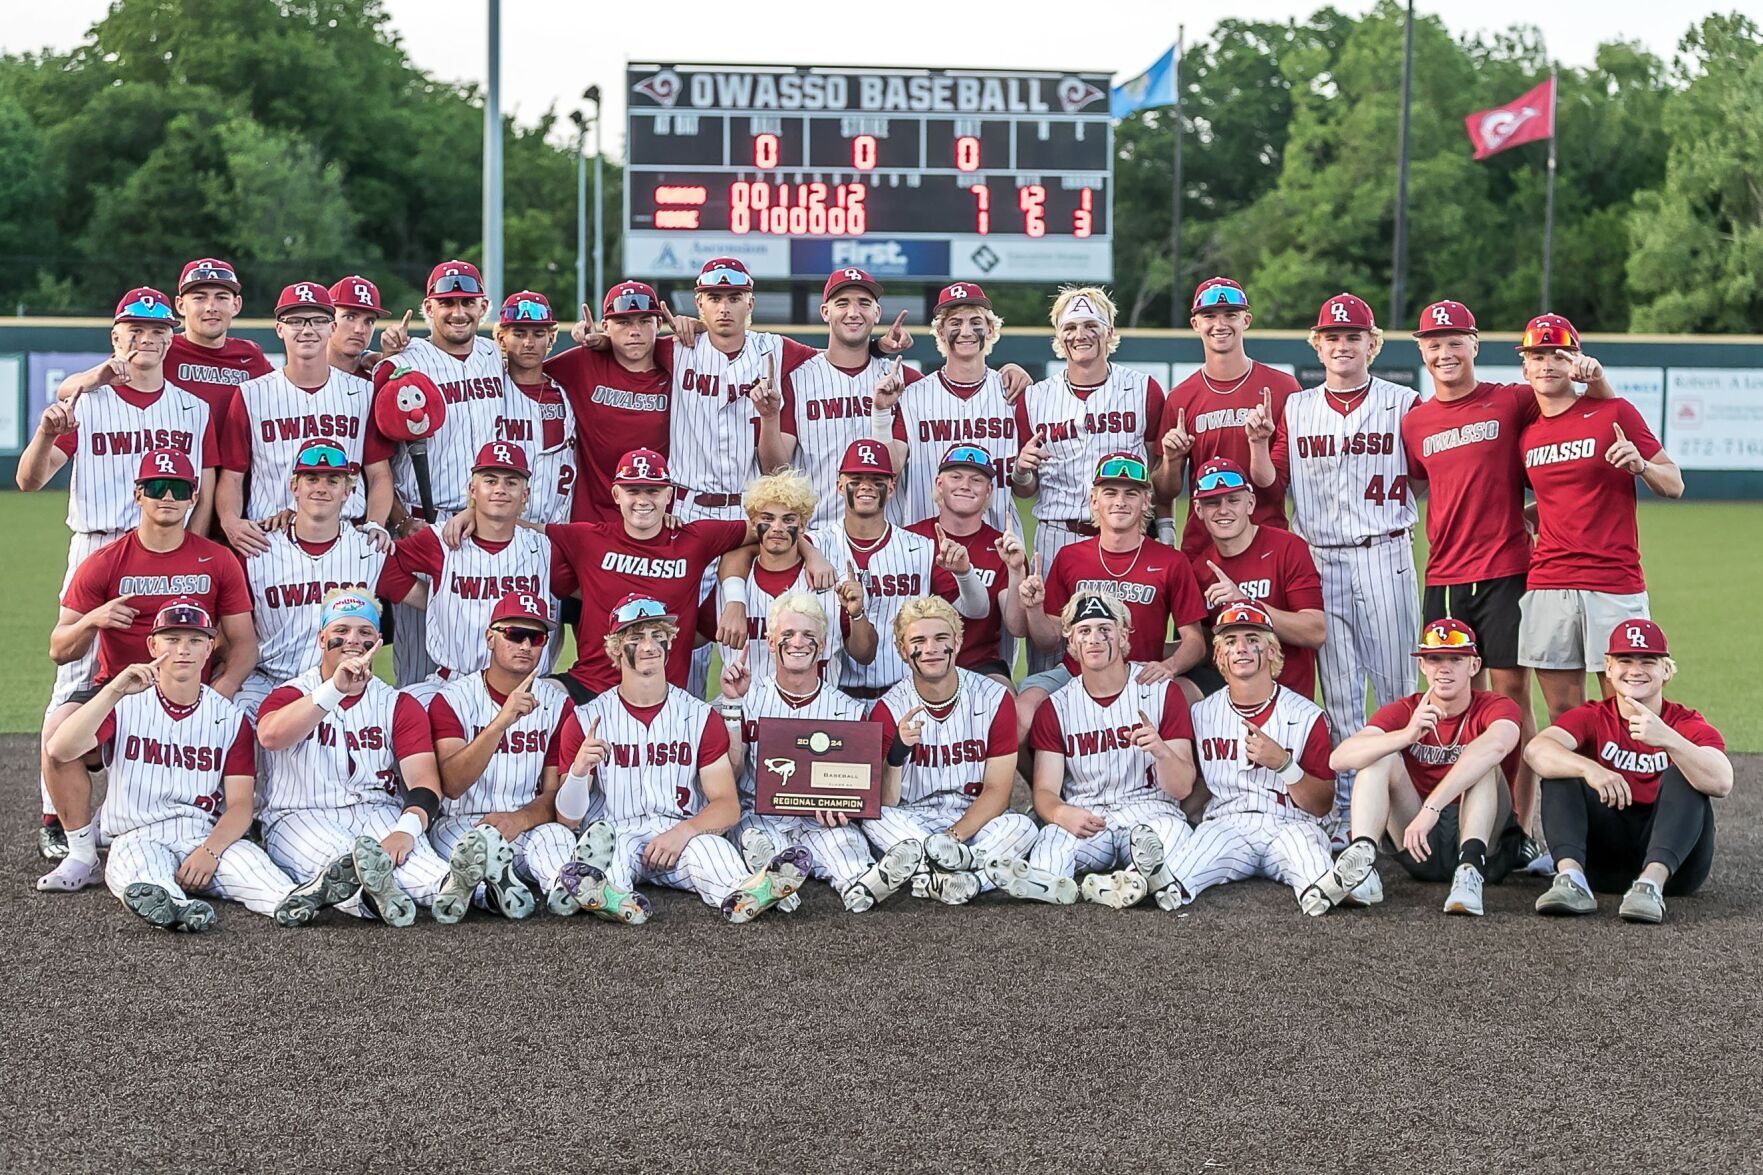 Oklahoma Baseball State Tournament Pairings Announced: Owasso to Pursue 15th Title in Class 6A Quarterfinals